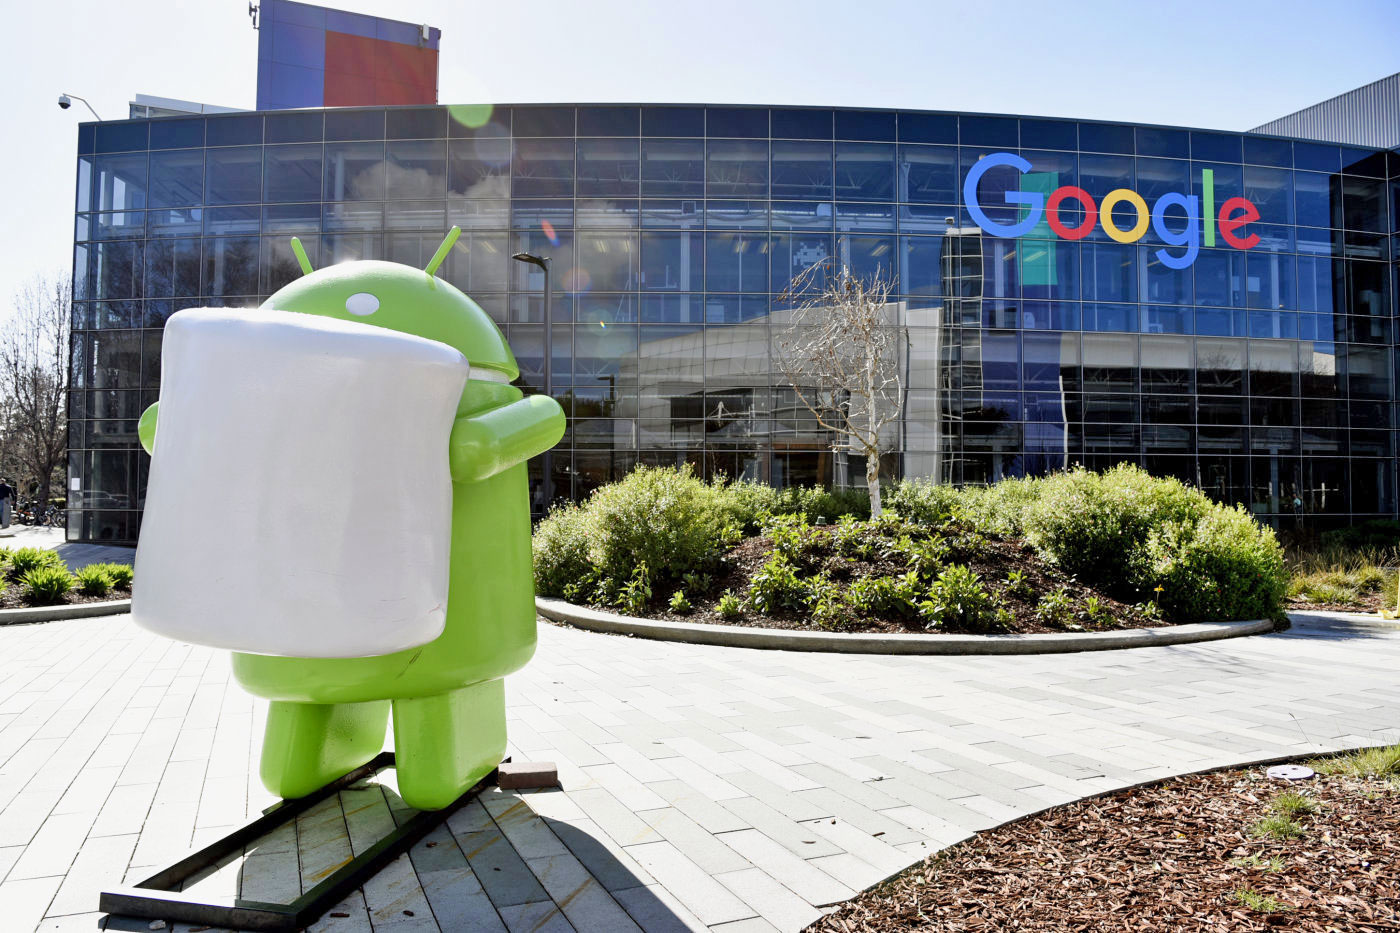 EU close to slapping Google with antitrust charges over Android